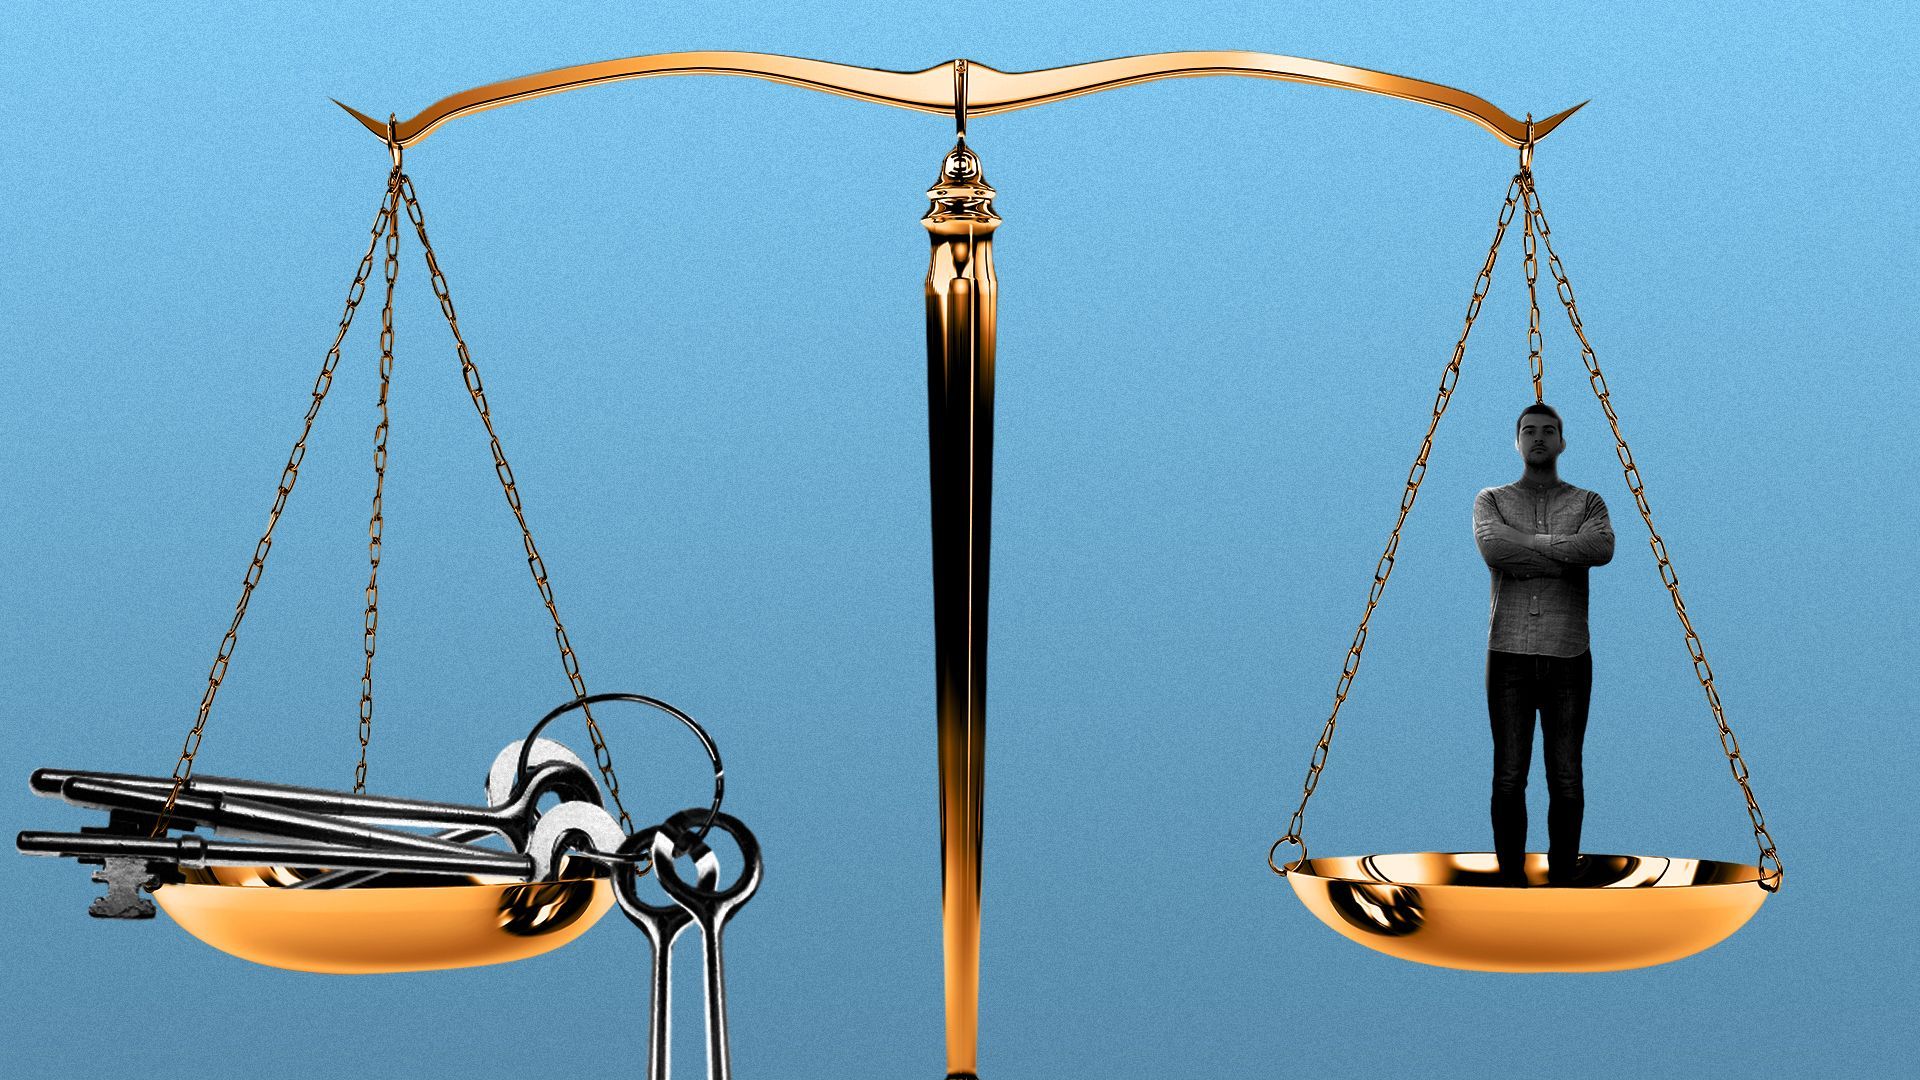 Illustration of a ring of many keys and a man on a balanced scale of justice.